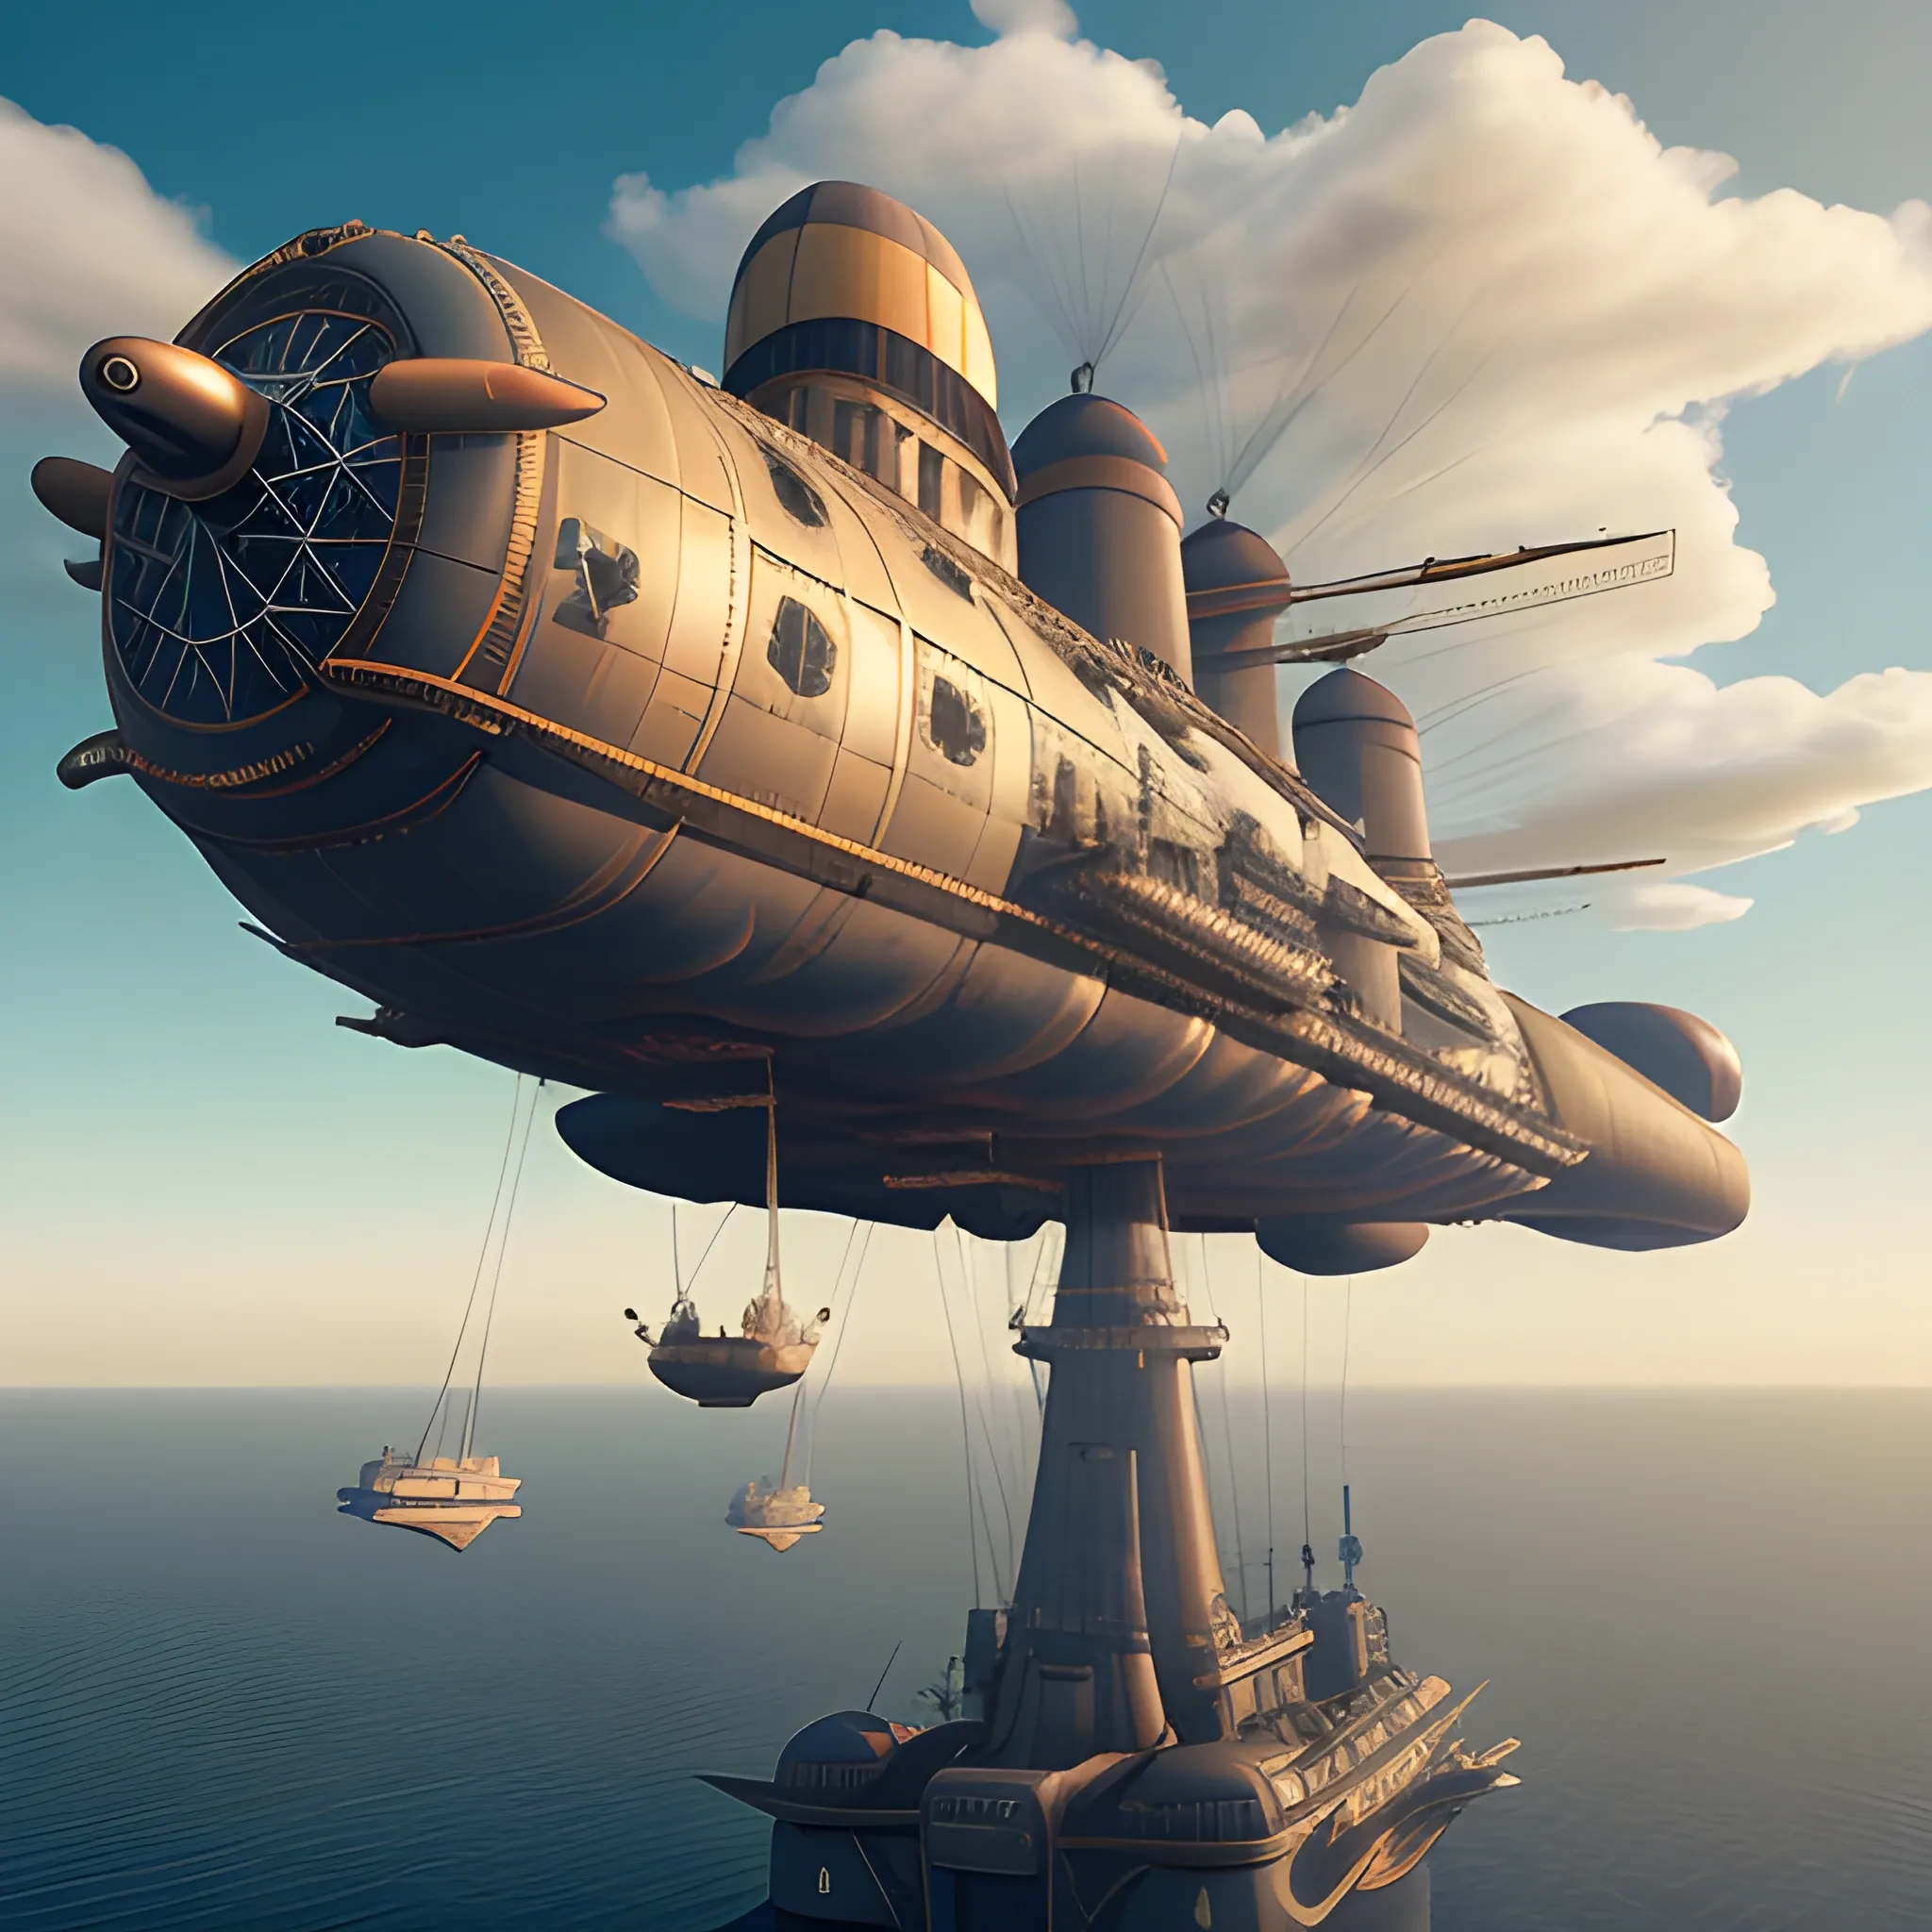 massive steampunk flying airship, blimp, dreadnaught, steampunk, pill-shaped, biplane fleets, turreted cannons on deck, cannons on hull, propeller engines, large cannons, deck guns, hull guns, weird guns, multiple guns, in air, flying, no water, high detail, 8k, octane render, biplanes flying around airship, in clouds, 3D